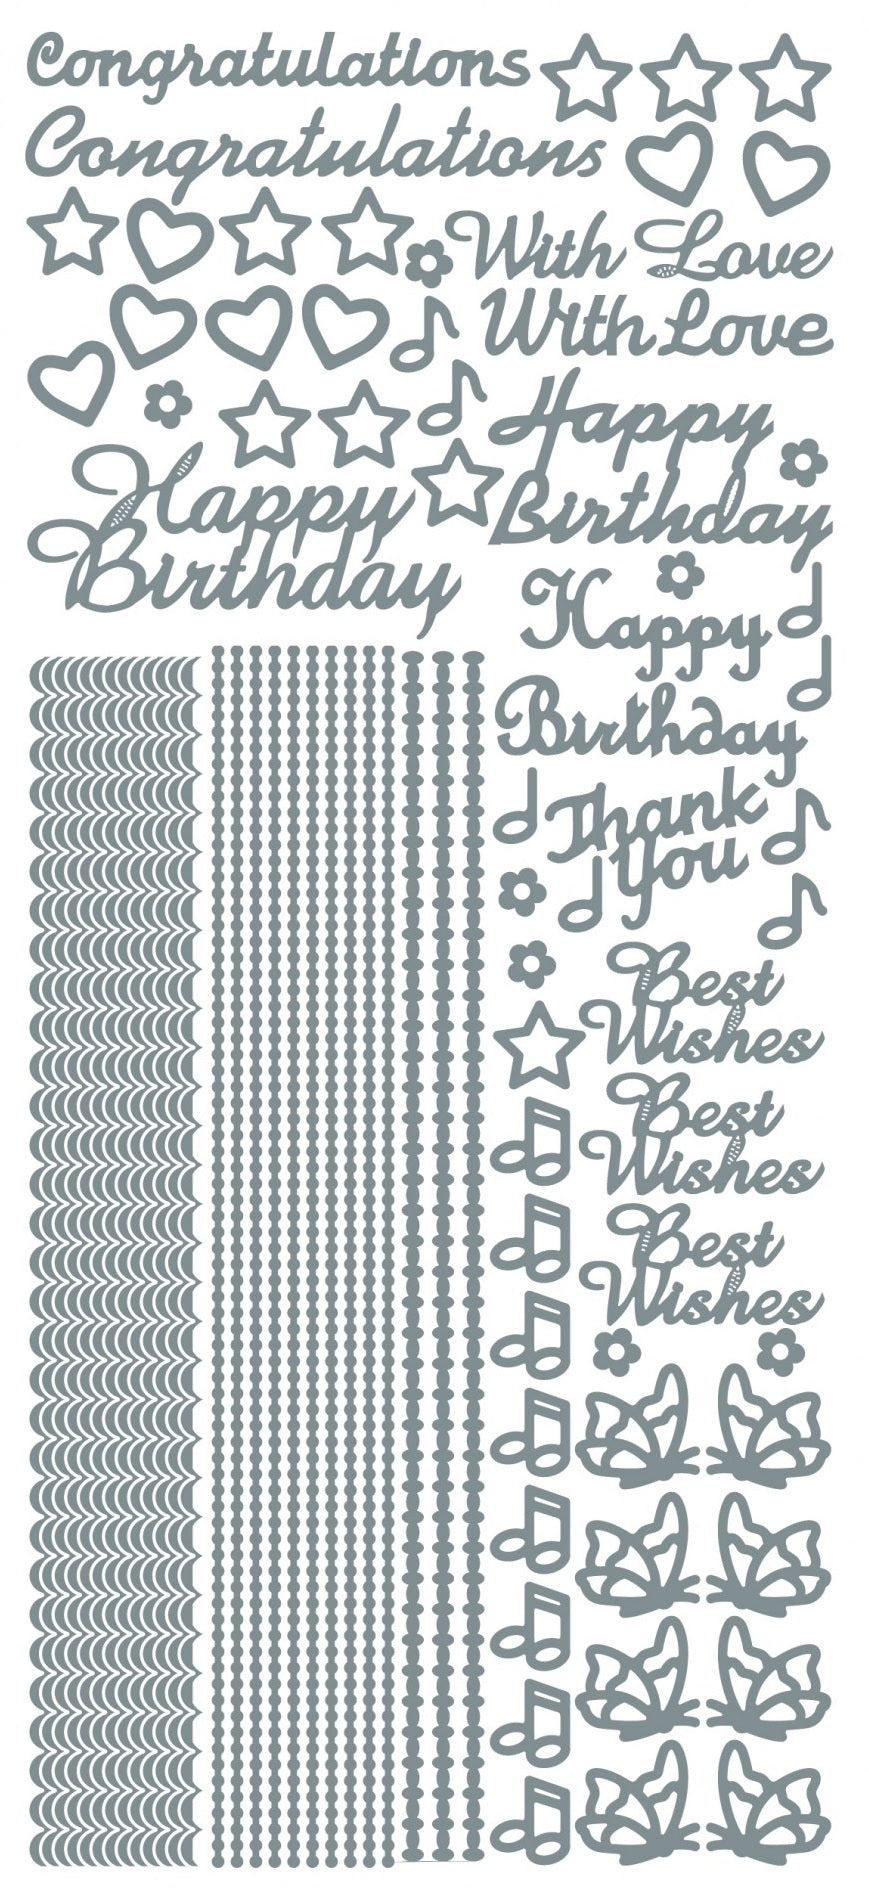 Congratulations-With Love-Borders Combo Outline Sticker  2.283